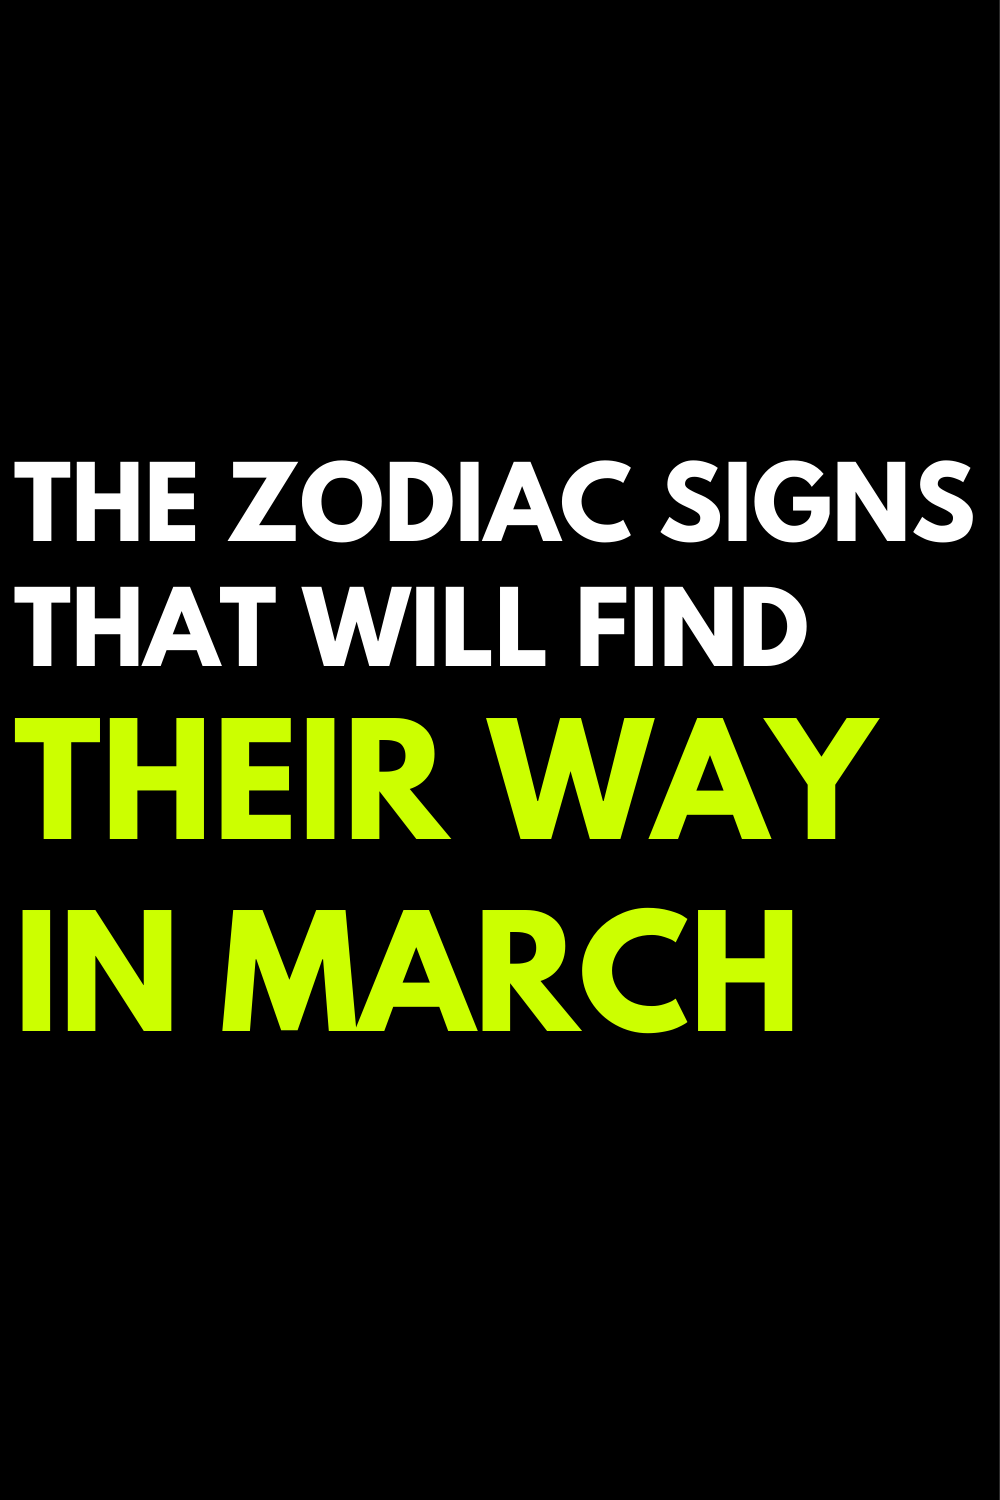 The zodiac signs that will find their way in March